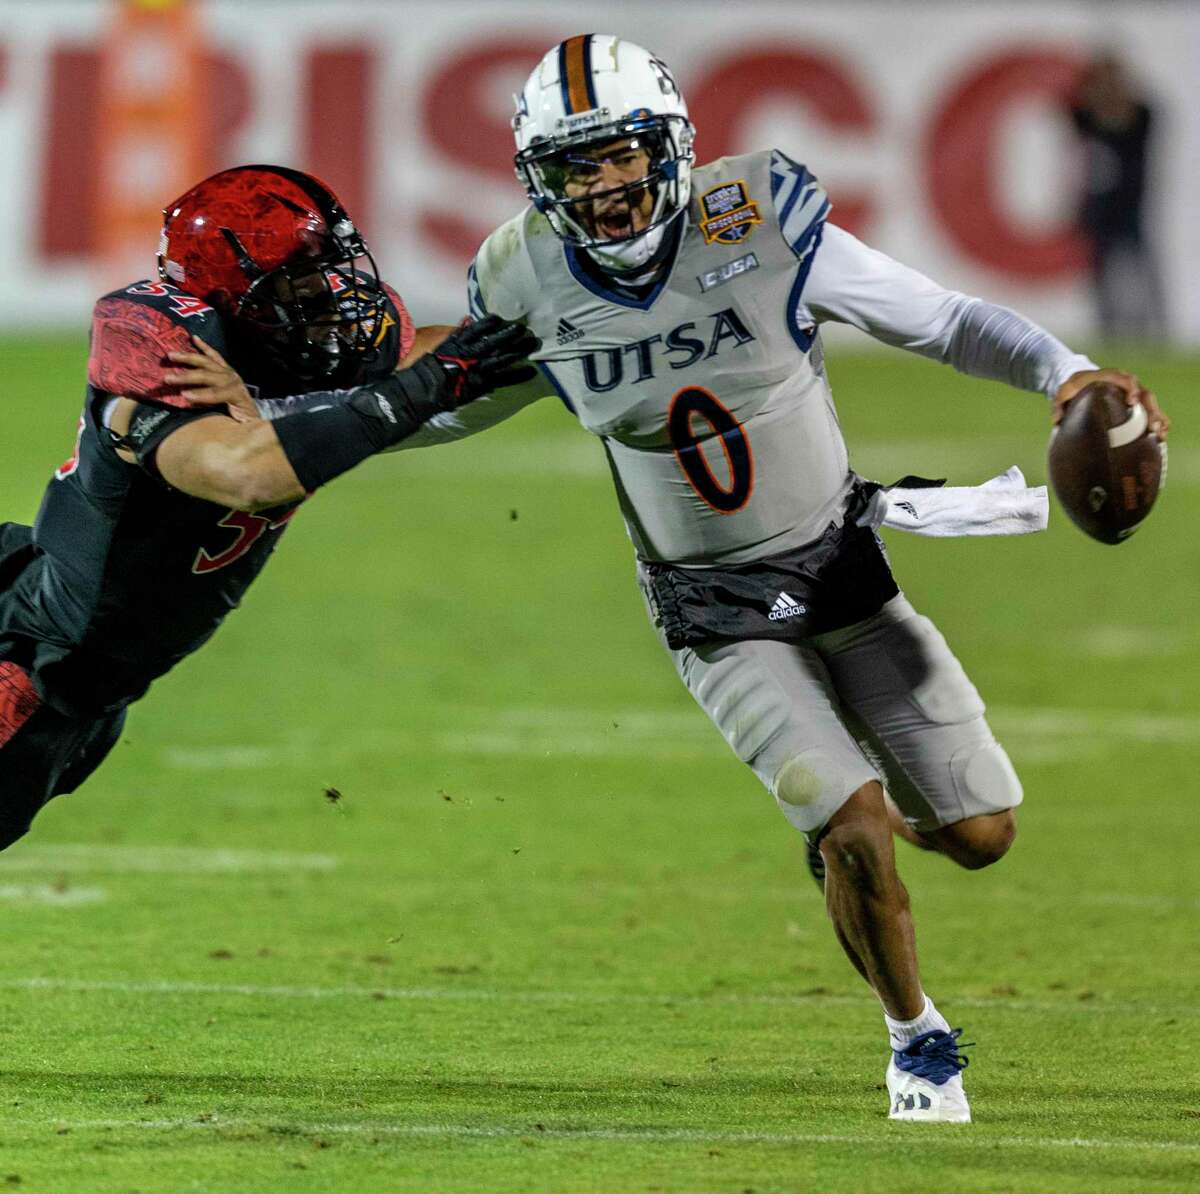 UTSA Roadrunners quarterback Frank Harris rushes Tuesday, Dec. 21, 2021 during the second half of the Tropical Smoothie Cafe Frisco Bowl in Frisco, Texas around San Diego State Aztecs linebacker Caden McDonald. San Diego State University beat the Roadrunners 38-24.